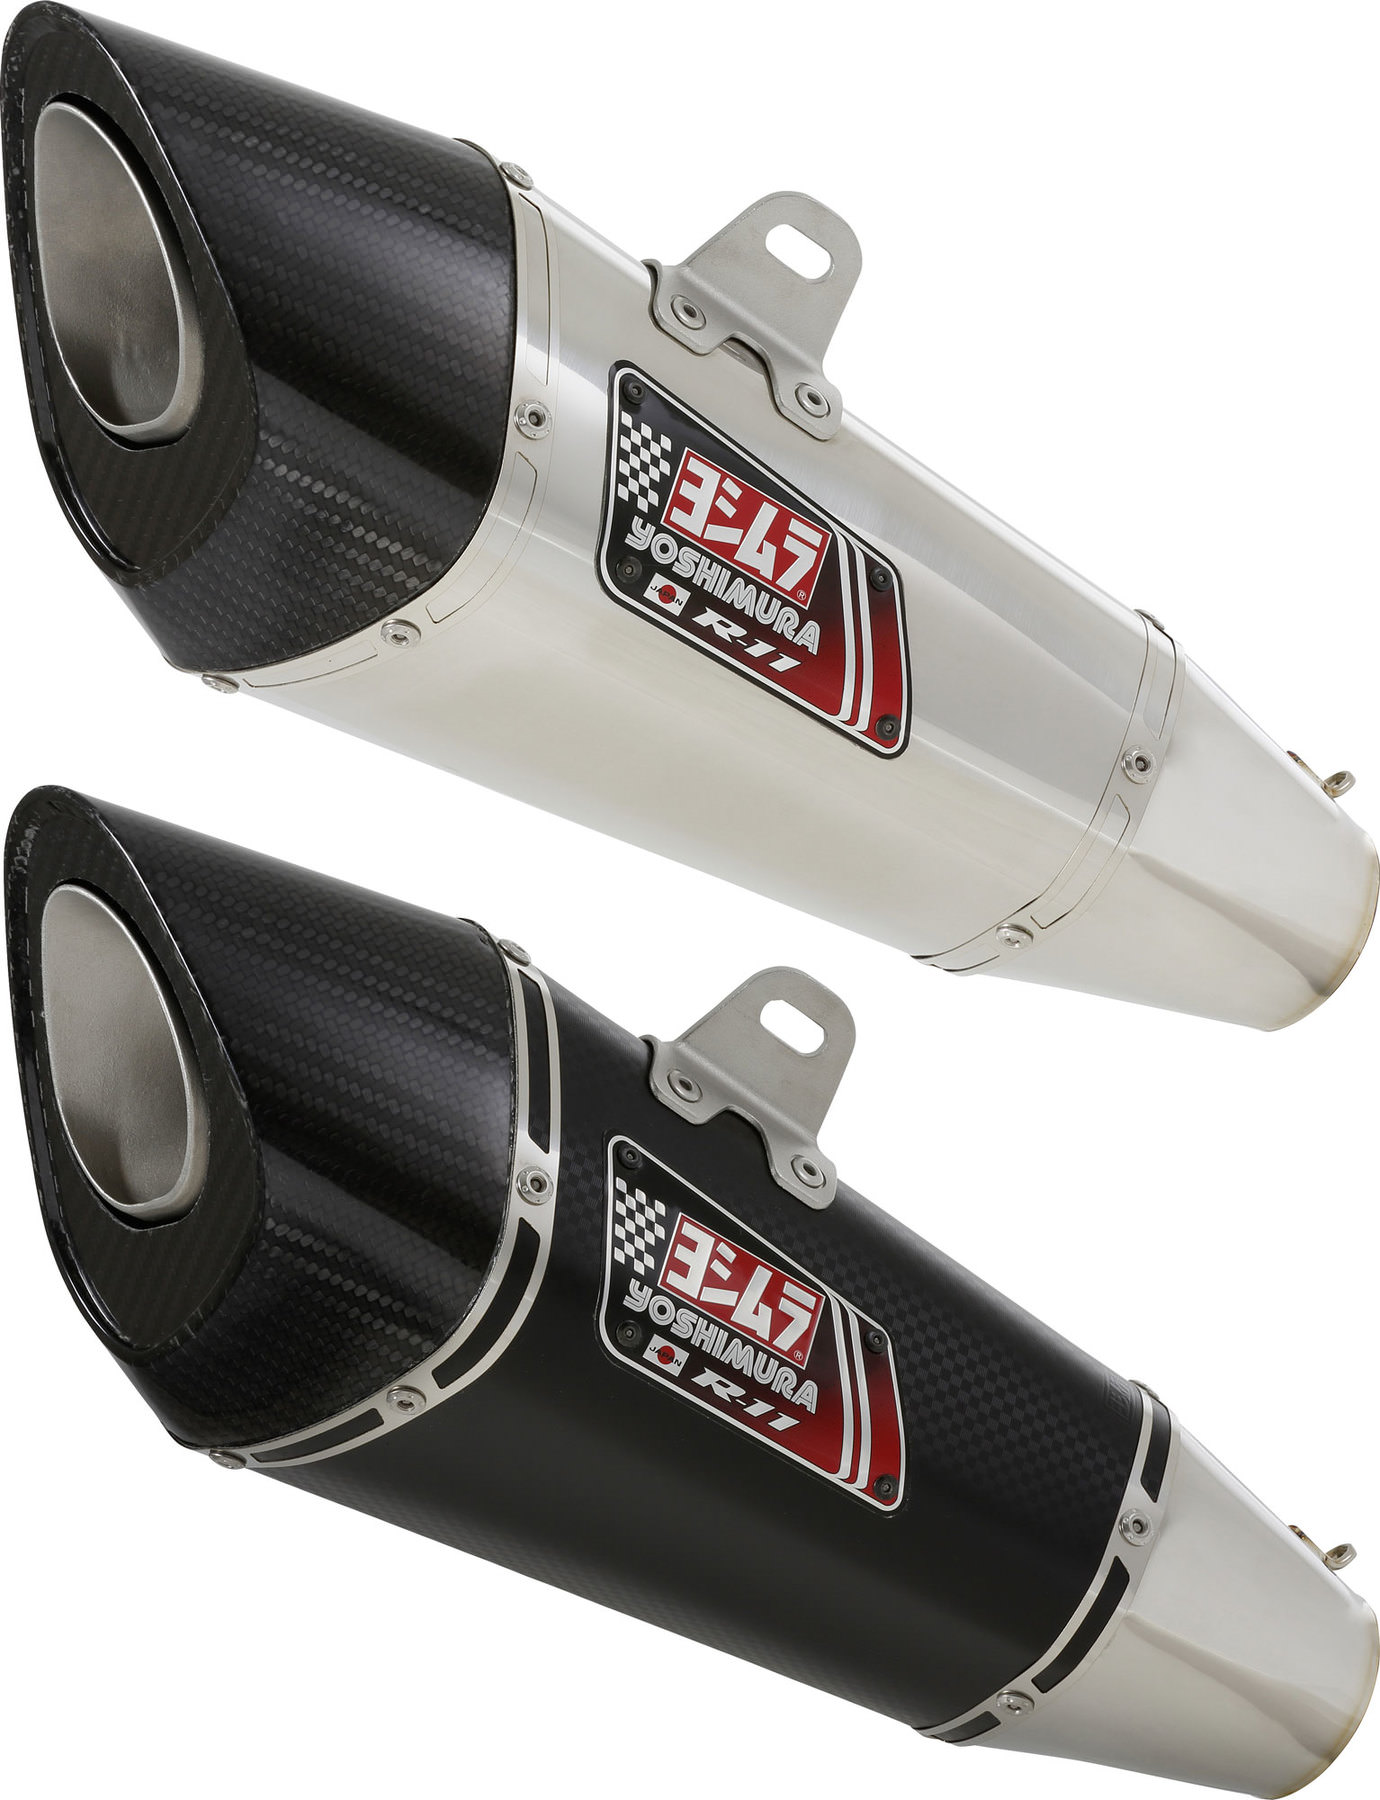 Buy YOSHIMURA R-11 rear silencer | Louis motorcycle clothing and technology